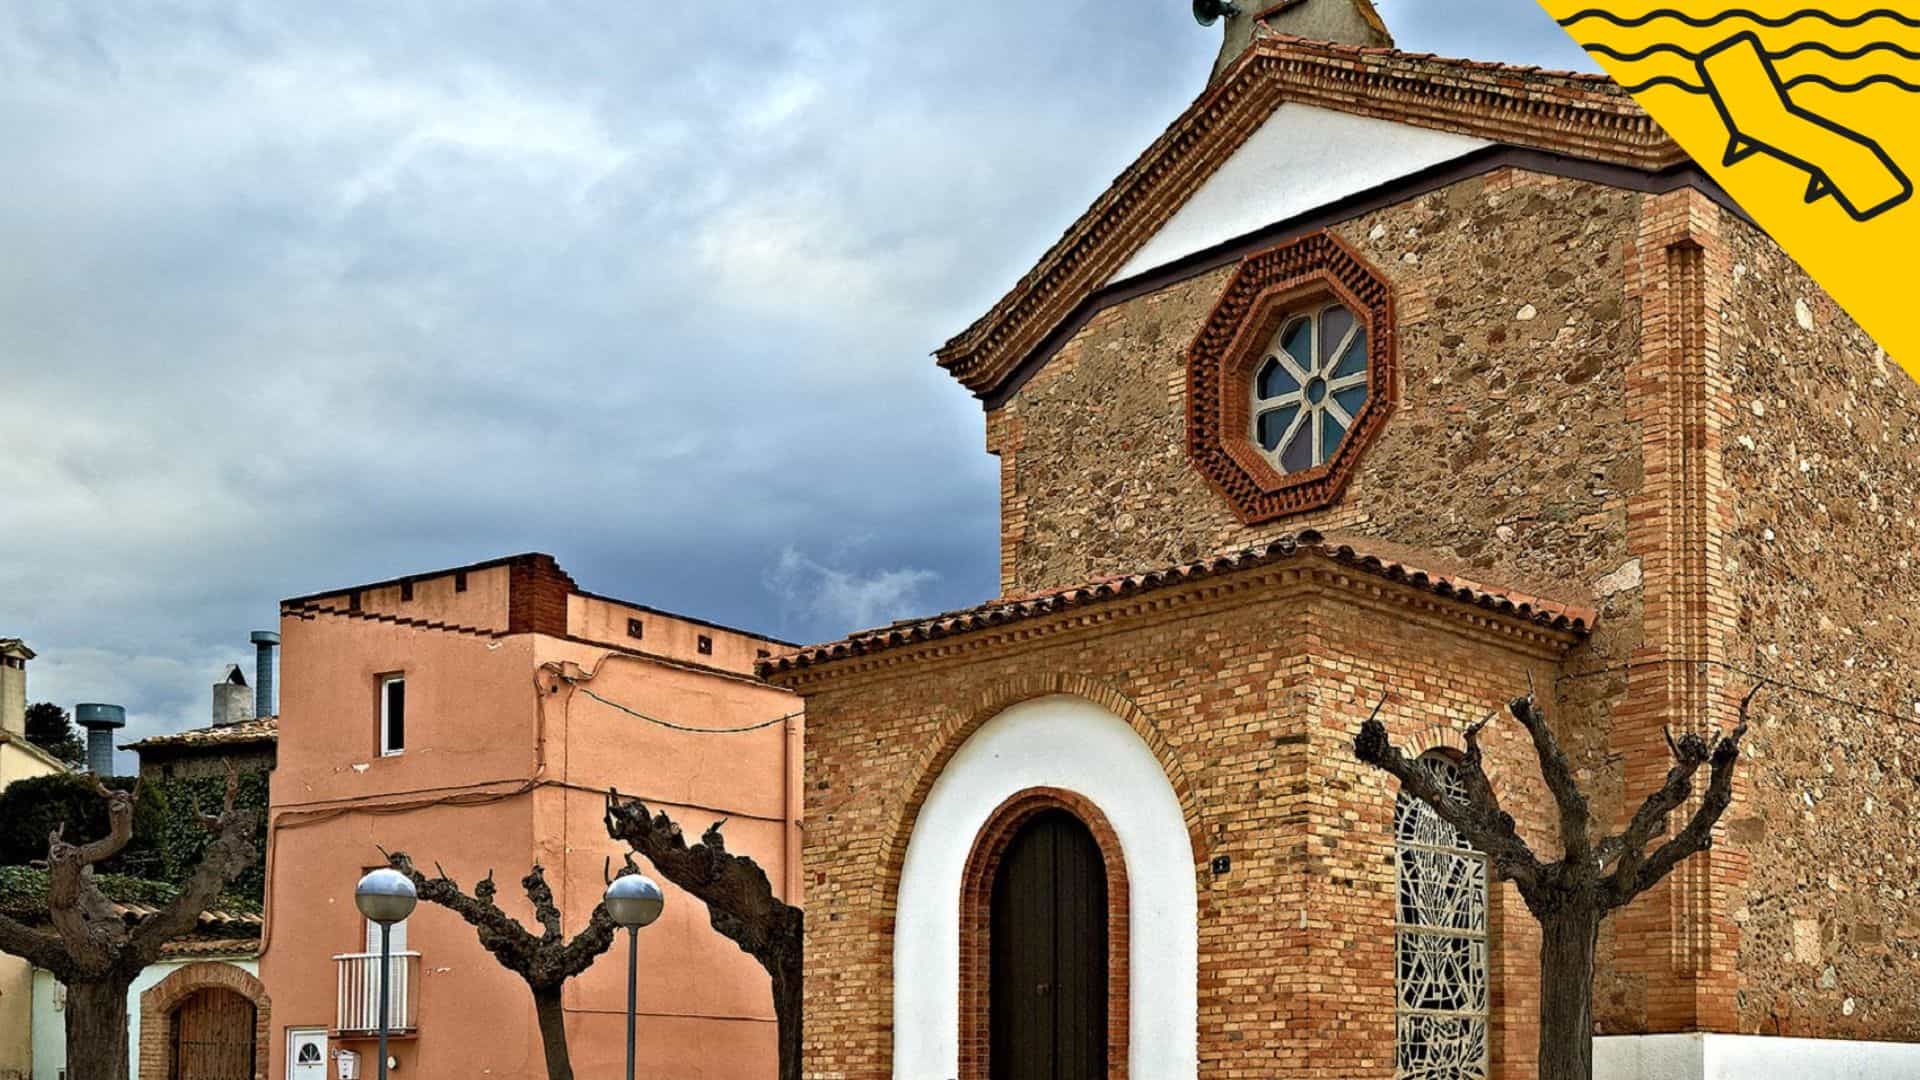 Discover Puigdàlber, the smallest village in Catalonia, just one hour from Barcelona.